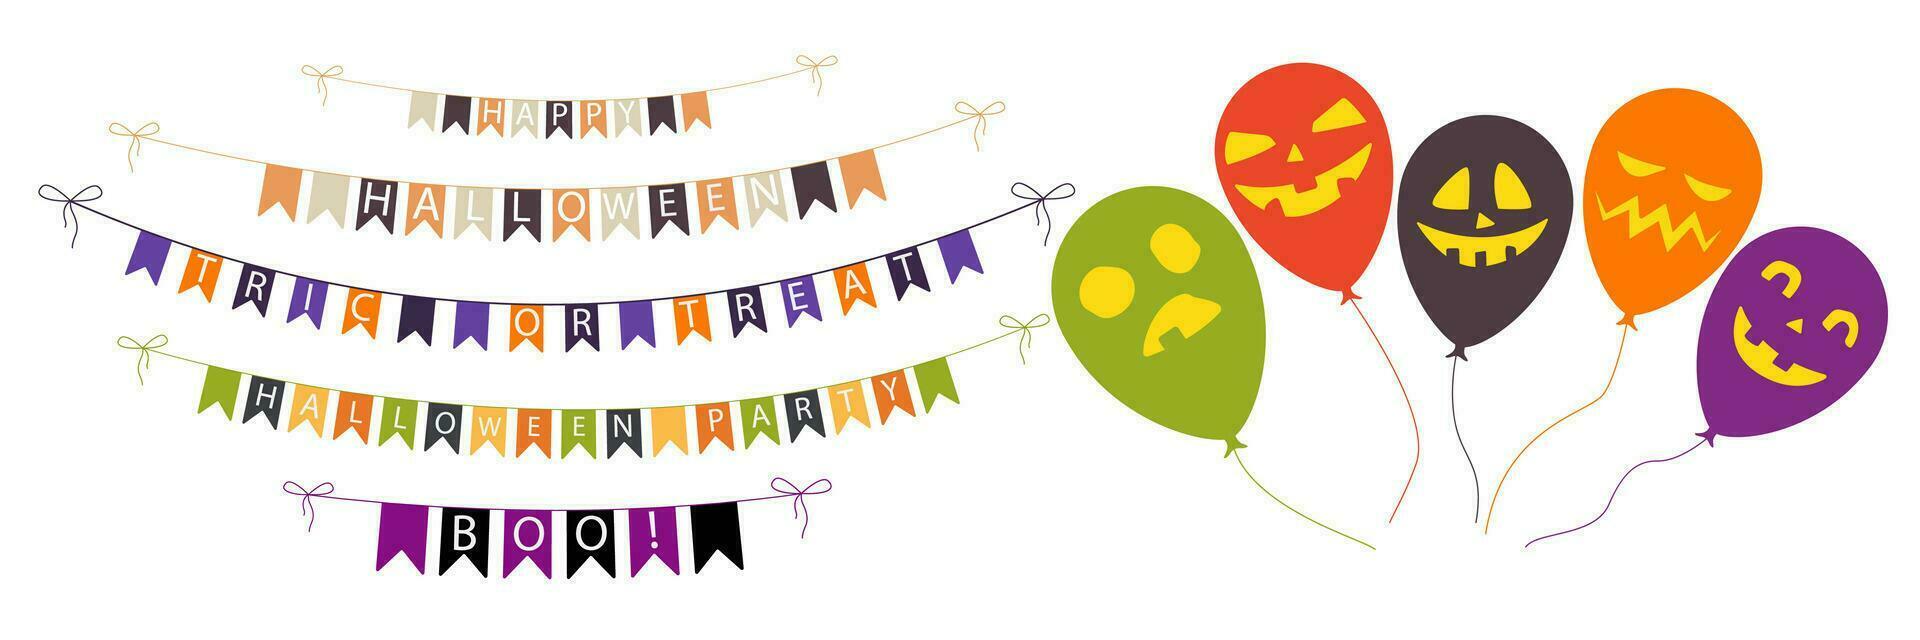 Halloween colorful party flags. Set vector illustration. Balloon, good for holiday design.